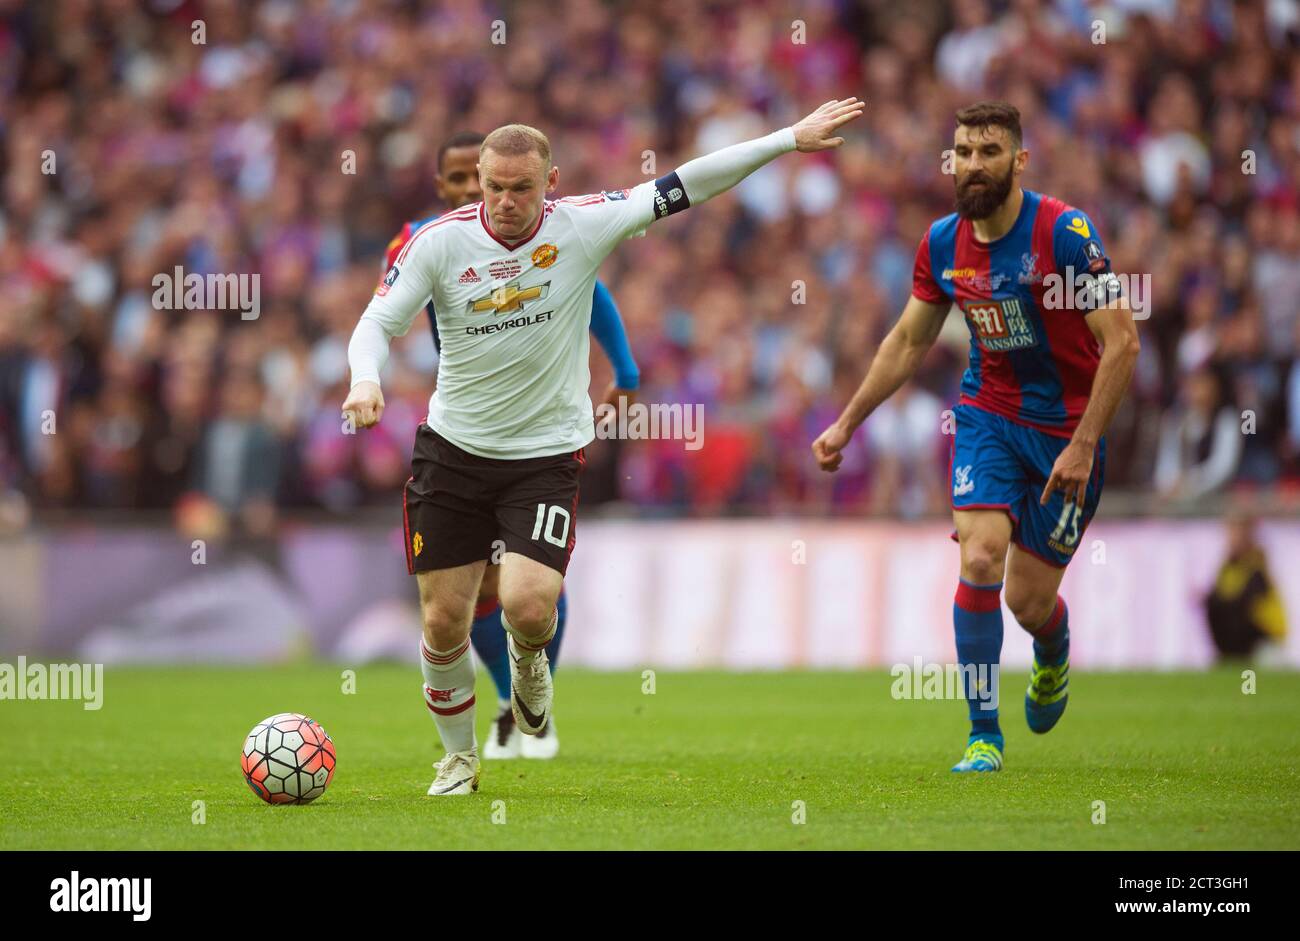 WAYNE ROONEY  Crystal Palace v Manchester United FA Cup Final - Wembley Stadium. Picture : © Mark Pain / Alamy Stock Photo